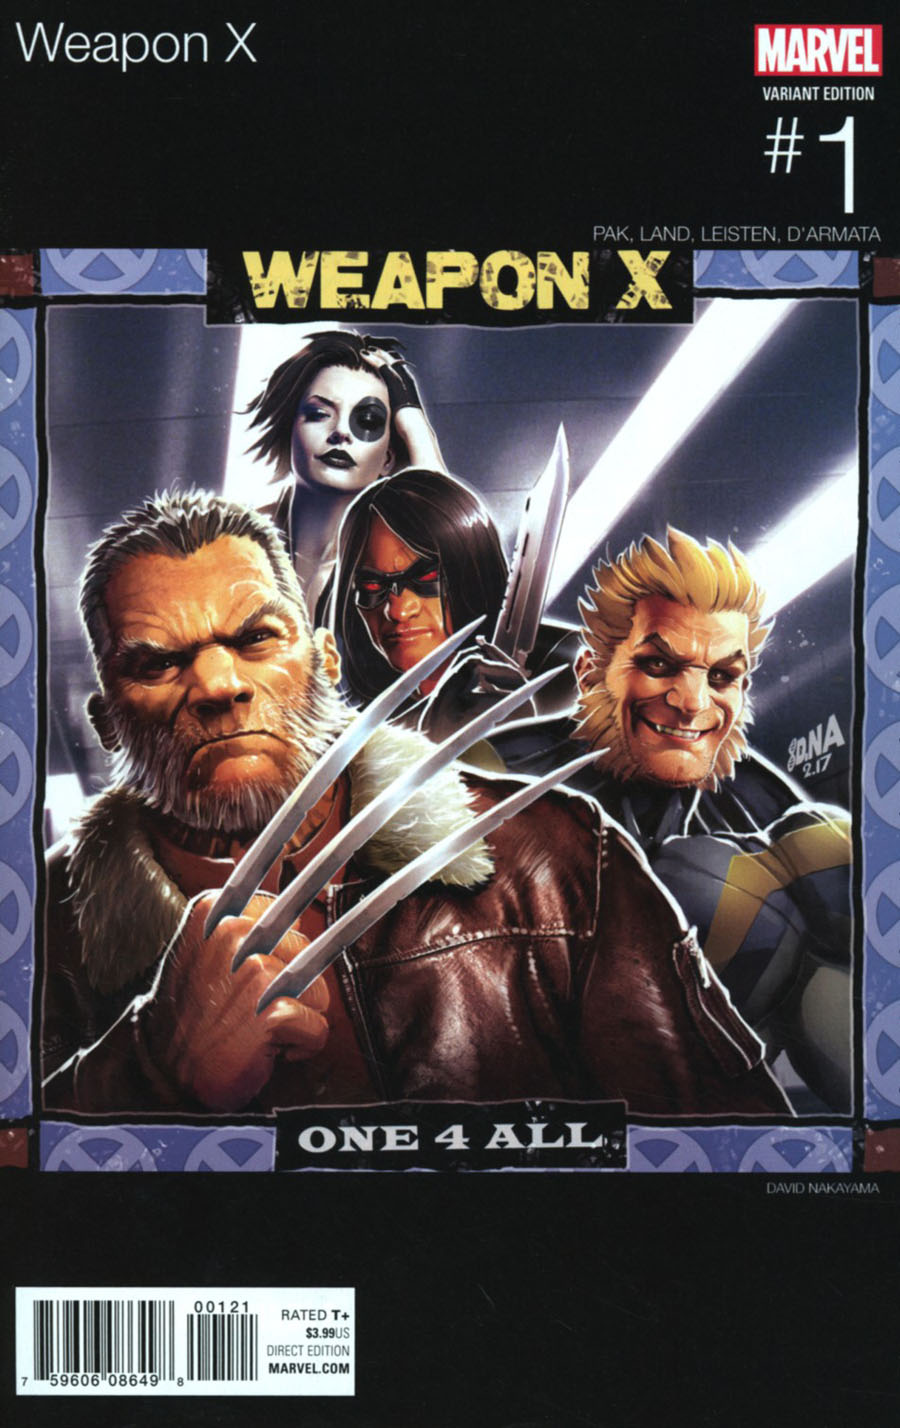 Weapon X Vol 3 #1 Cover B Variant David Nakayama Marvel Hip-Hop Cover (Resurrxion Tie-In)